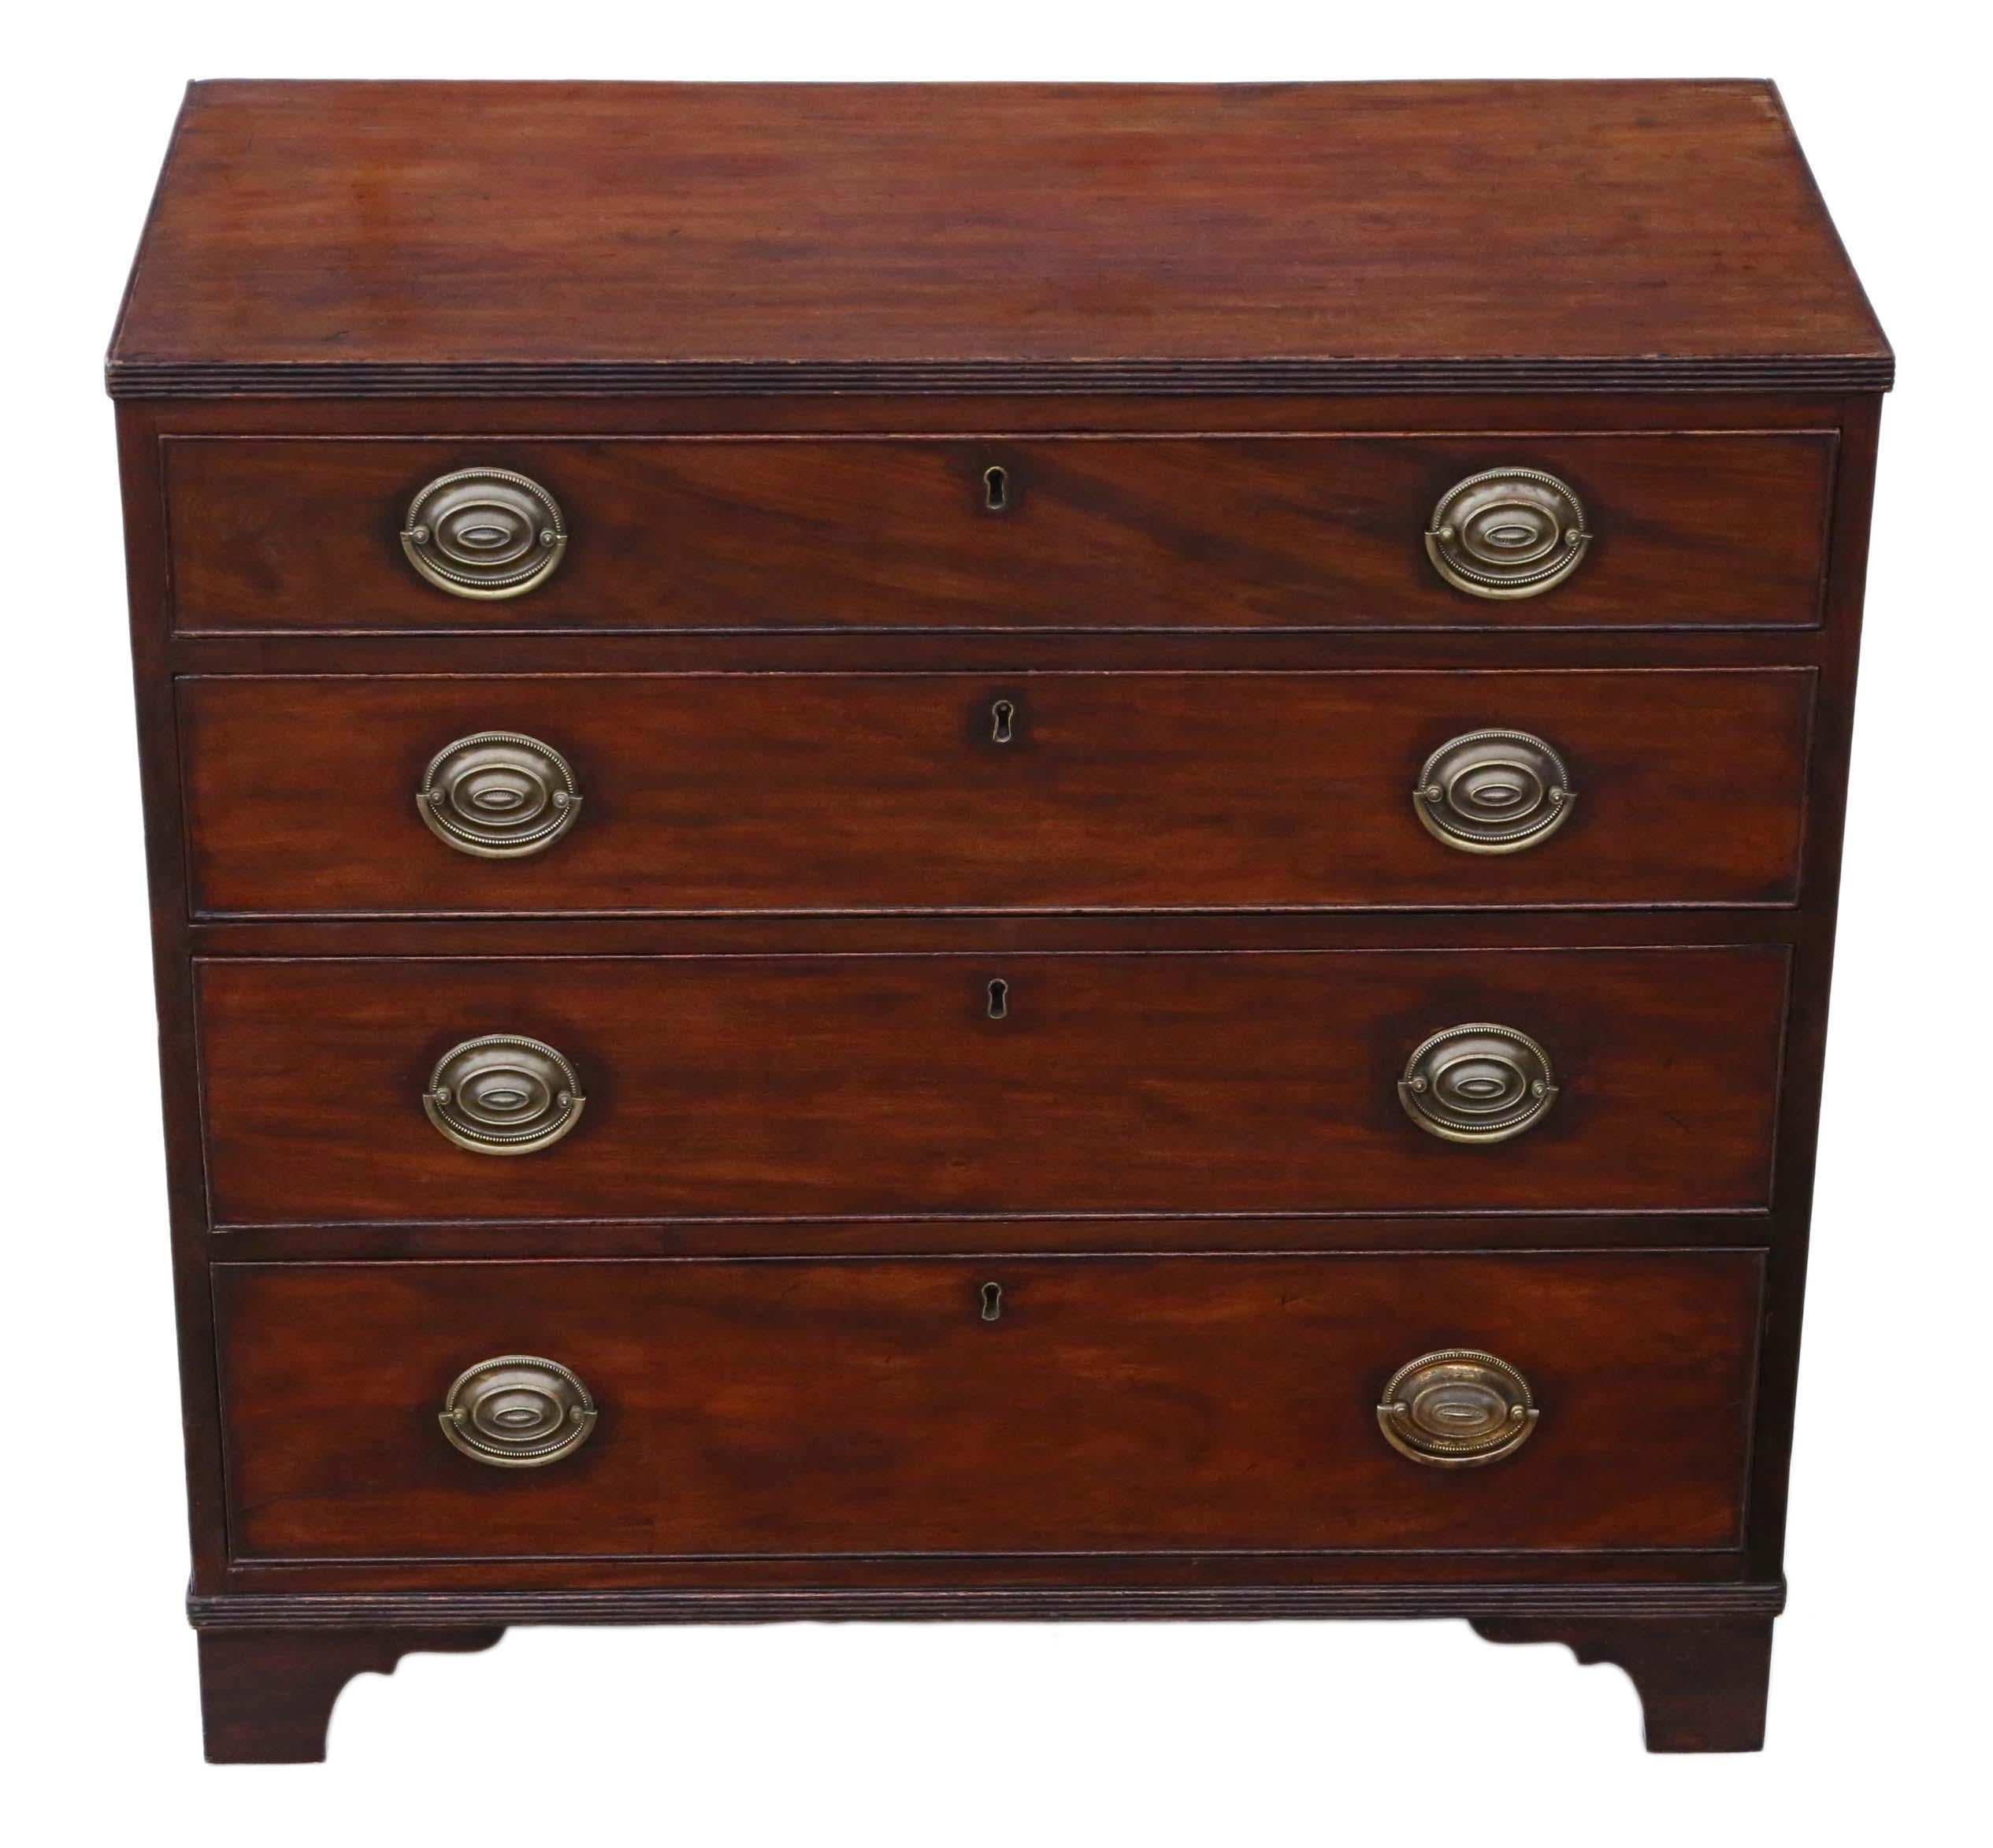 Antique quality Georgian mahogany bachelor's chest of drawers, circa 1820.
This is a lovely chest, that is full of age and character.
A rare quality piece with clean simple lines.
Solid, no loose joints and no woodworm.
The drawers slide freely.